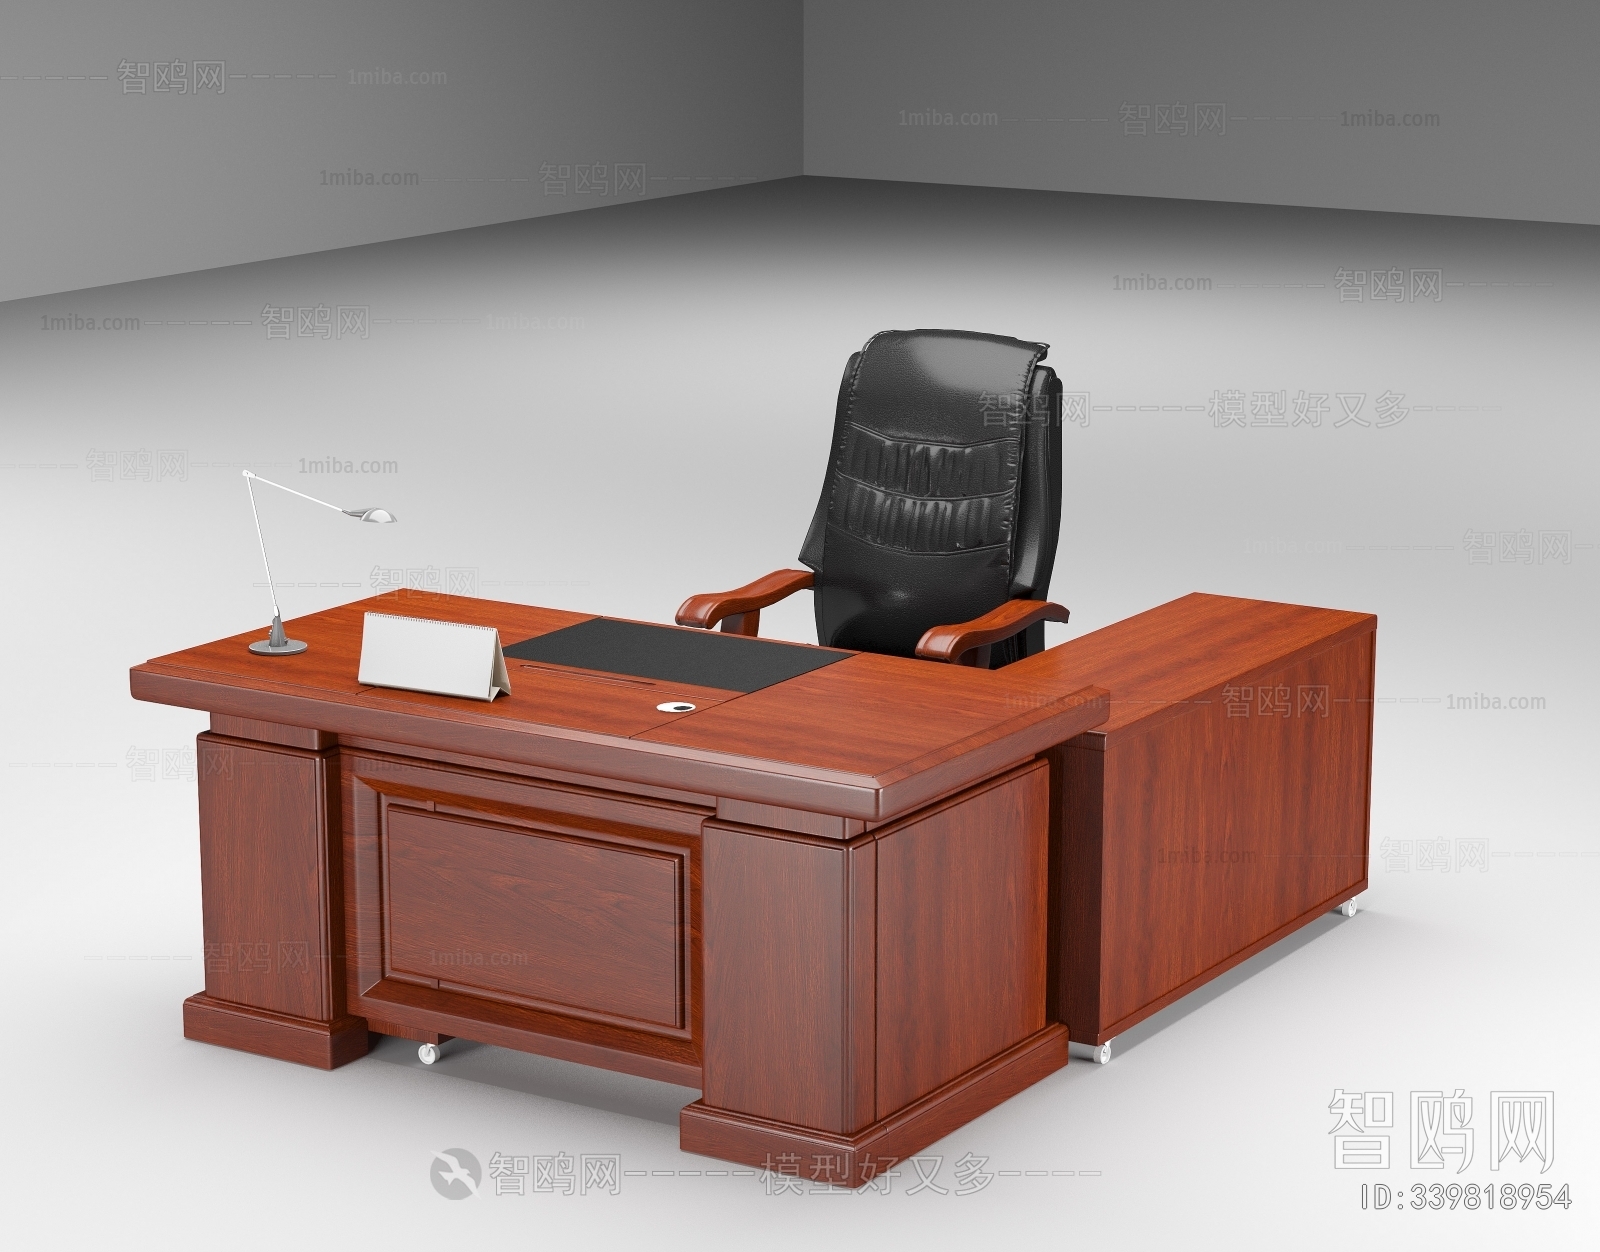 Chinese Style Manager's Desk